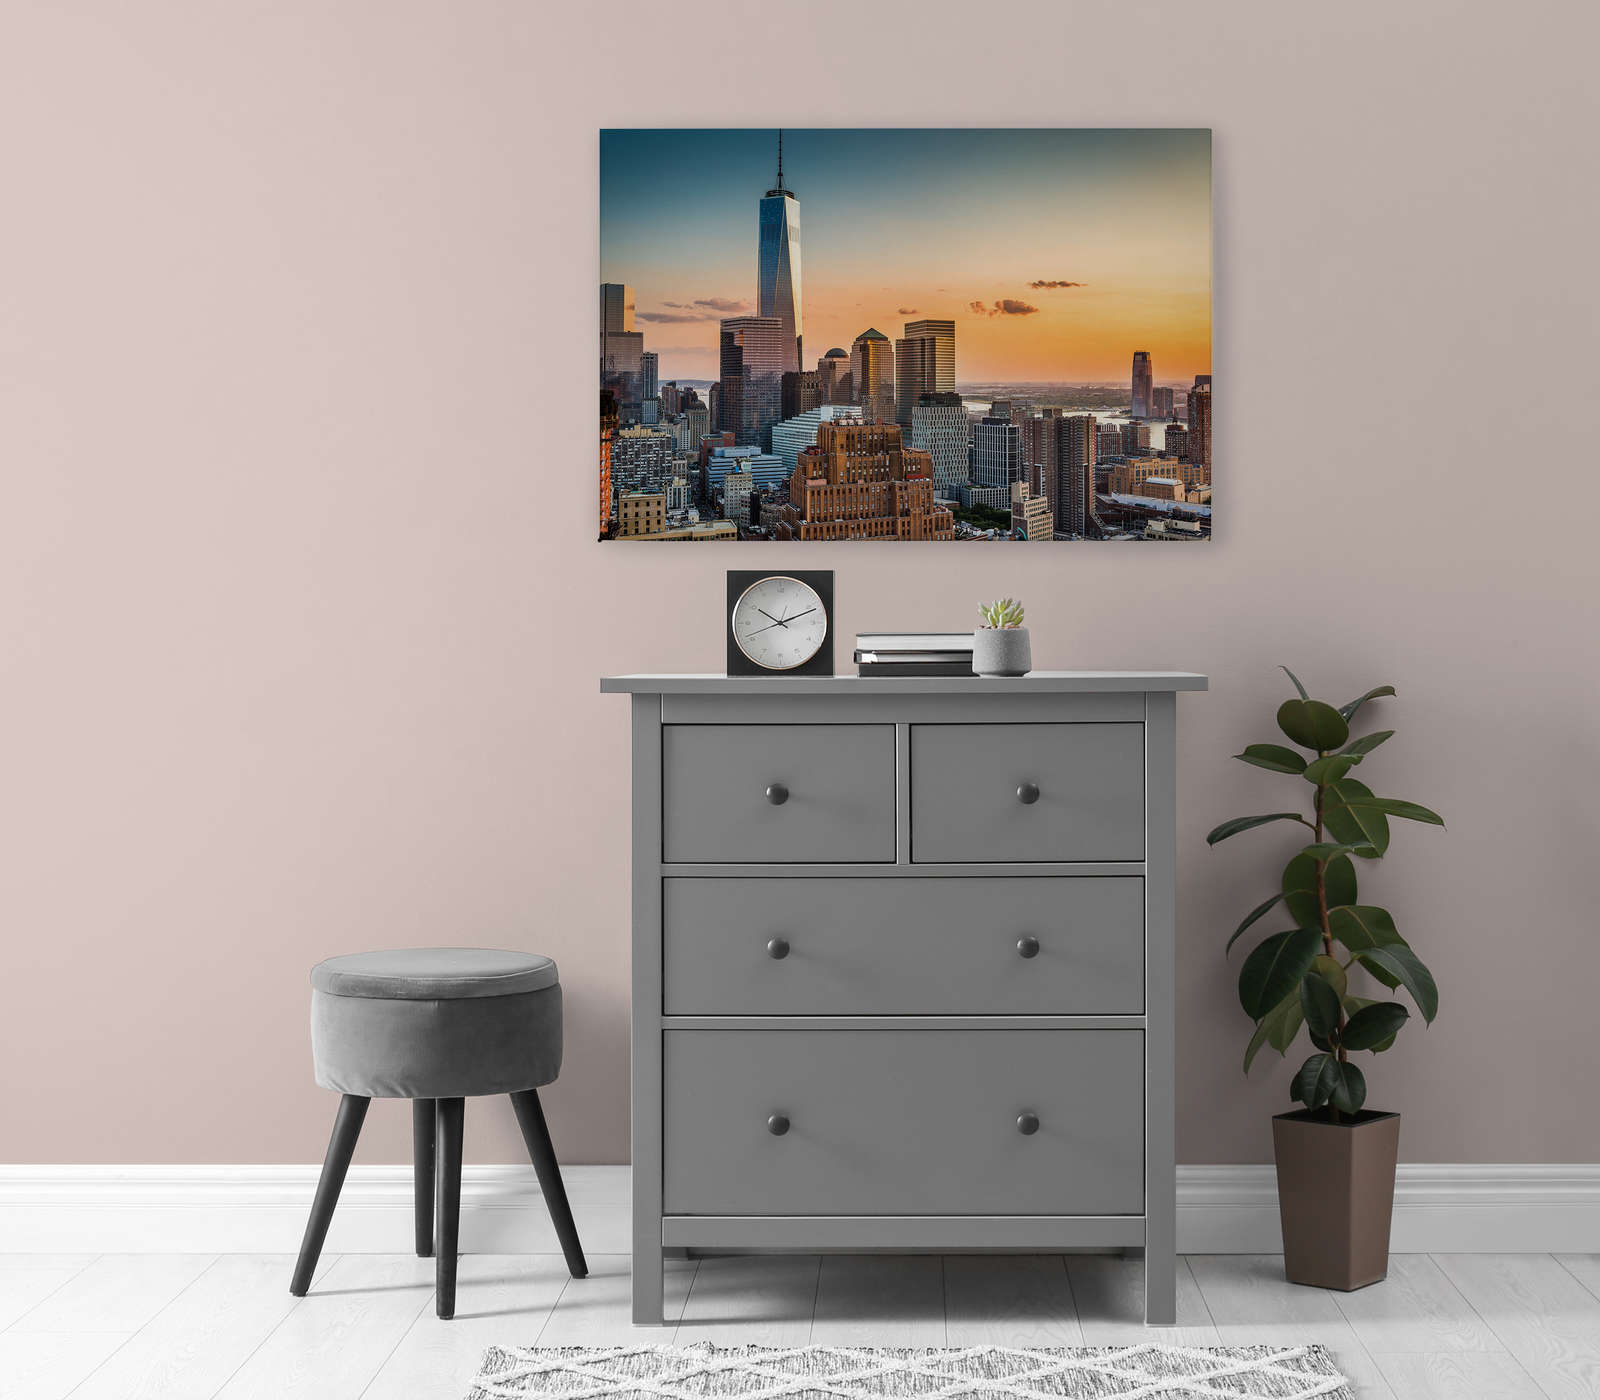             Canvas painting with Manhattan skyline at sunset - 0.90 m x 0.60 m
        